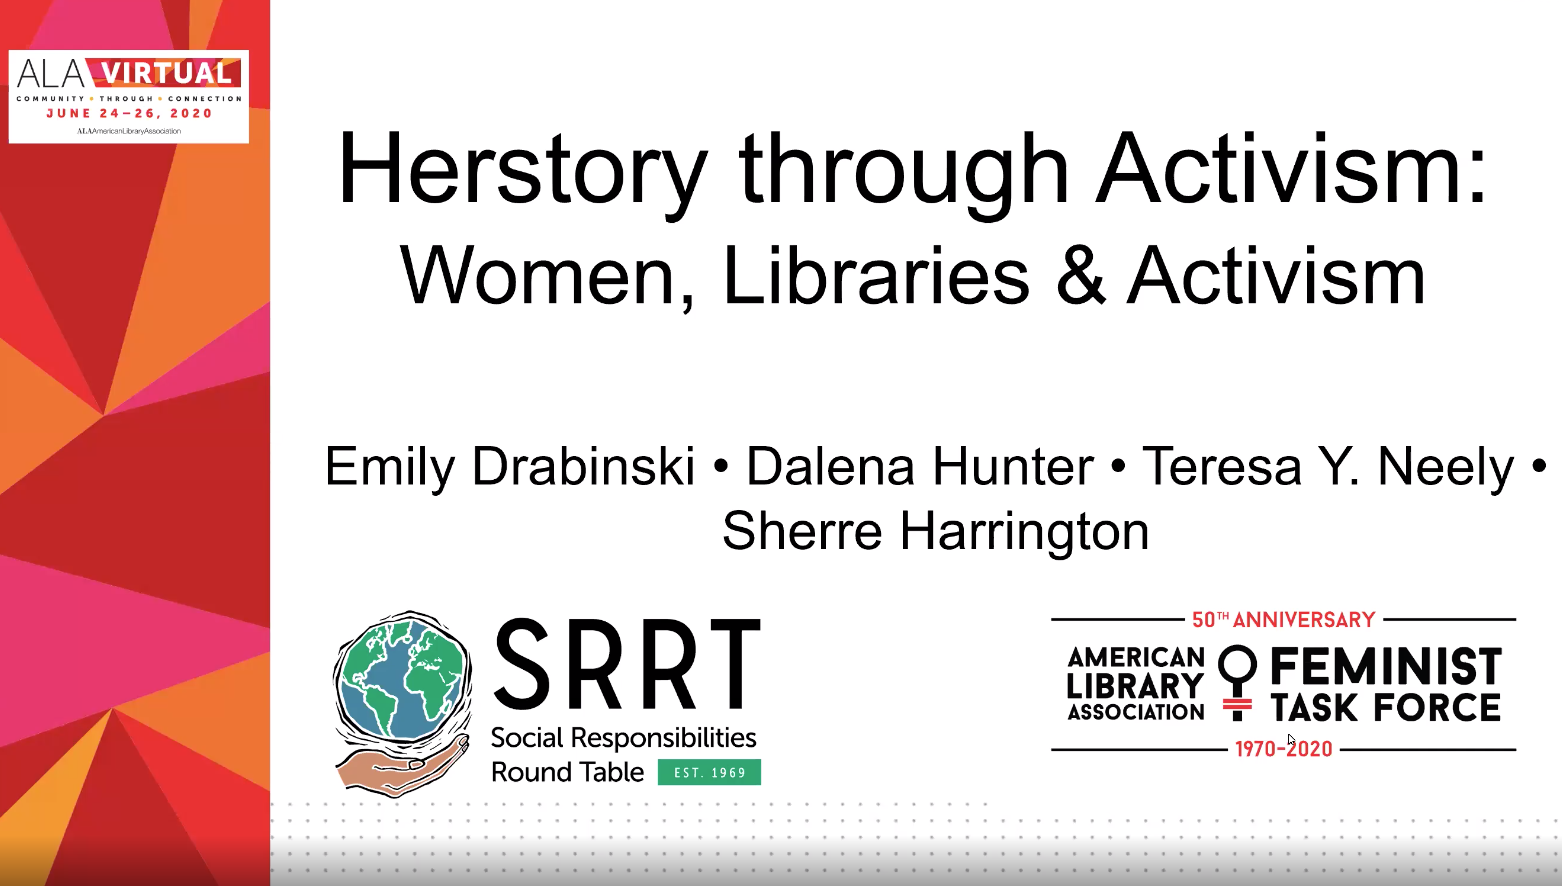 Intersections of Women, Libraries, and Activism | ALA Virtual 2020